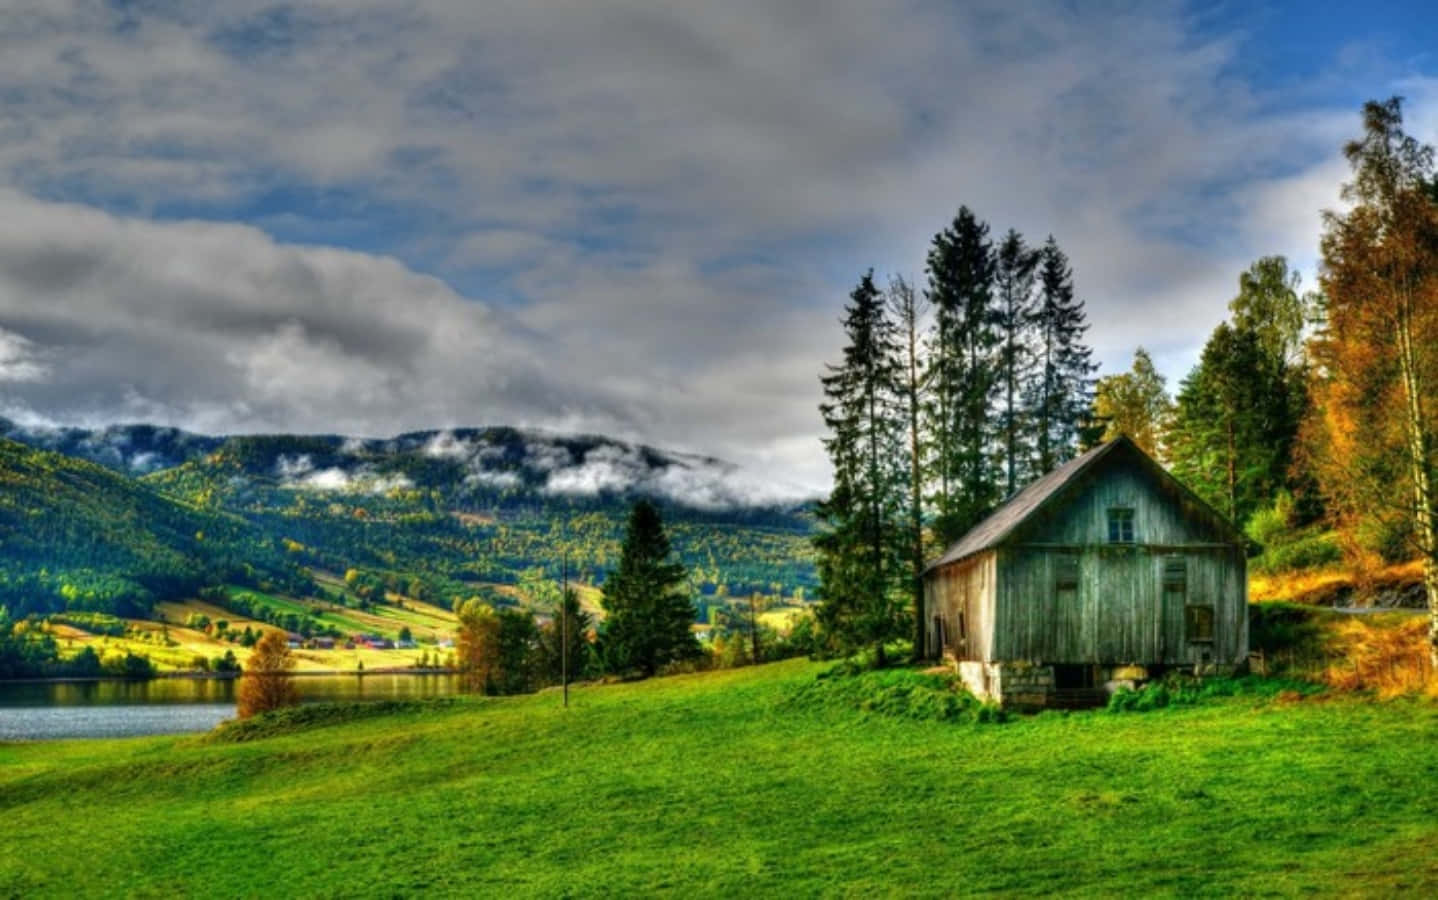 "Tranquil Scene of a Rustic Hut Surrounded by Nature"